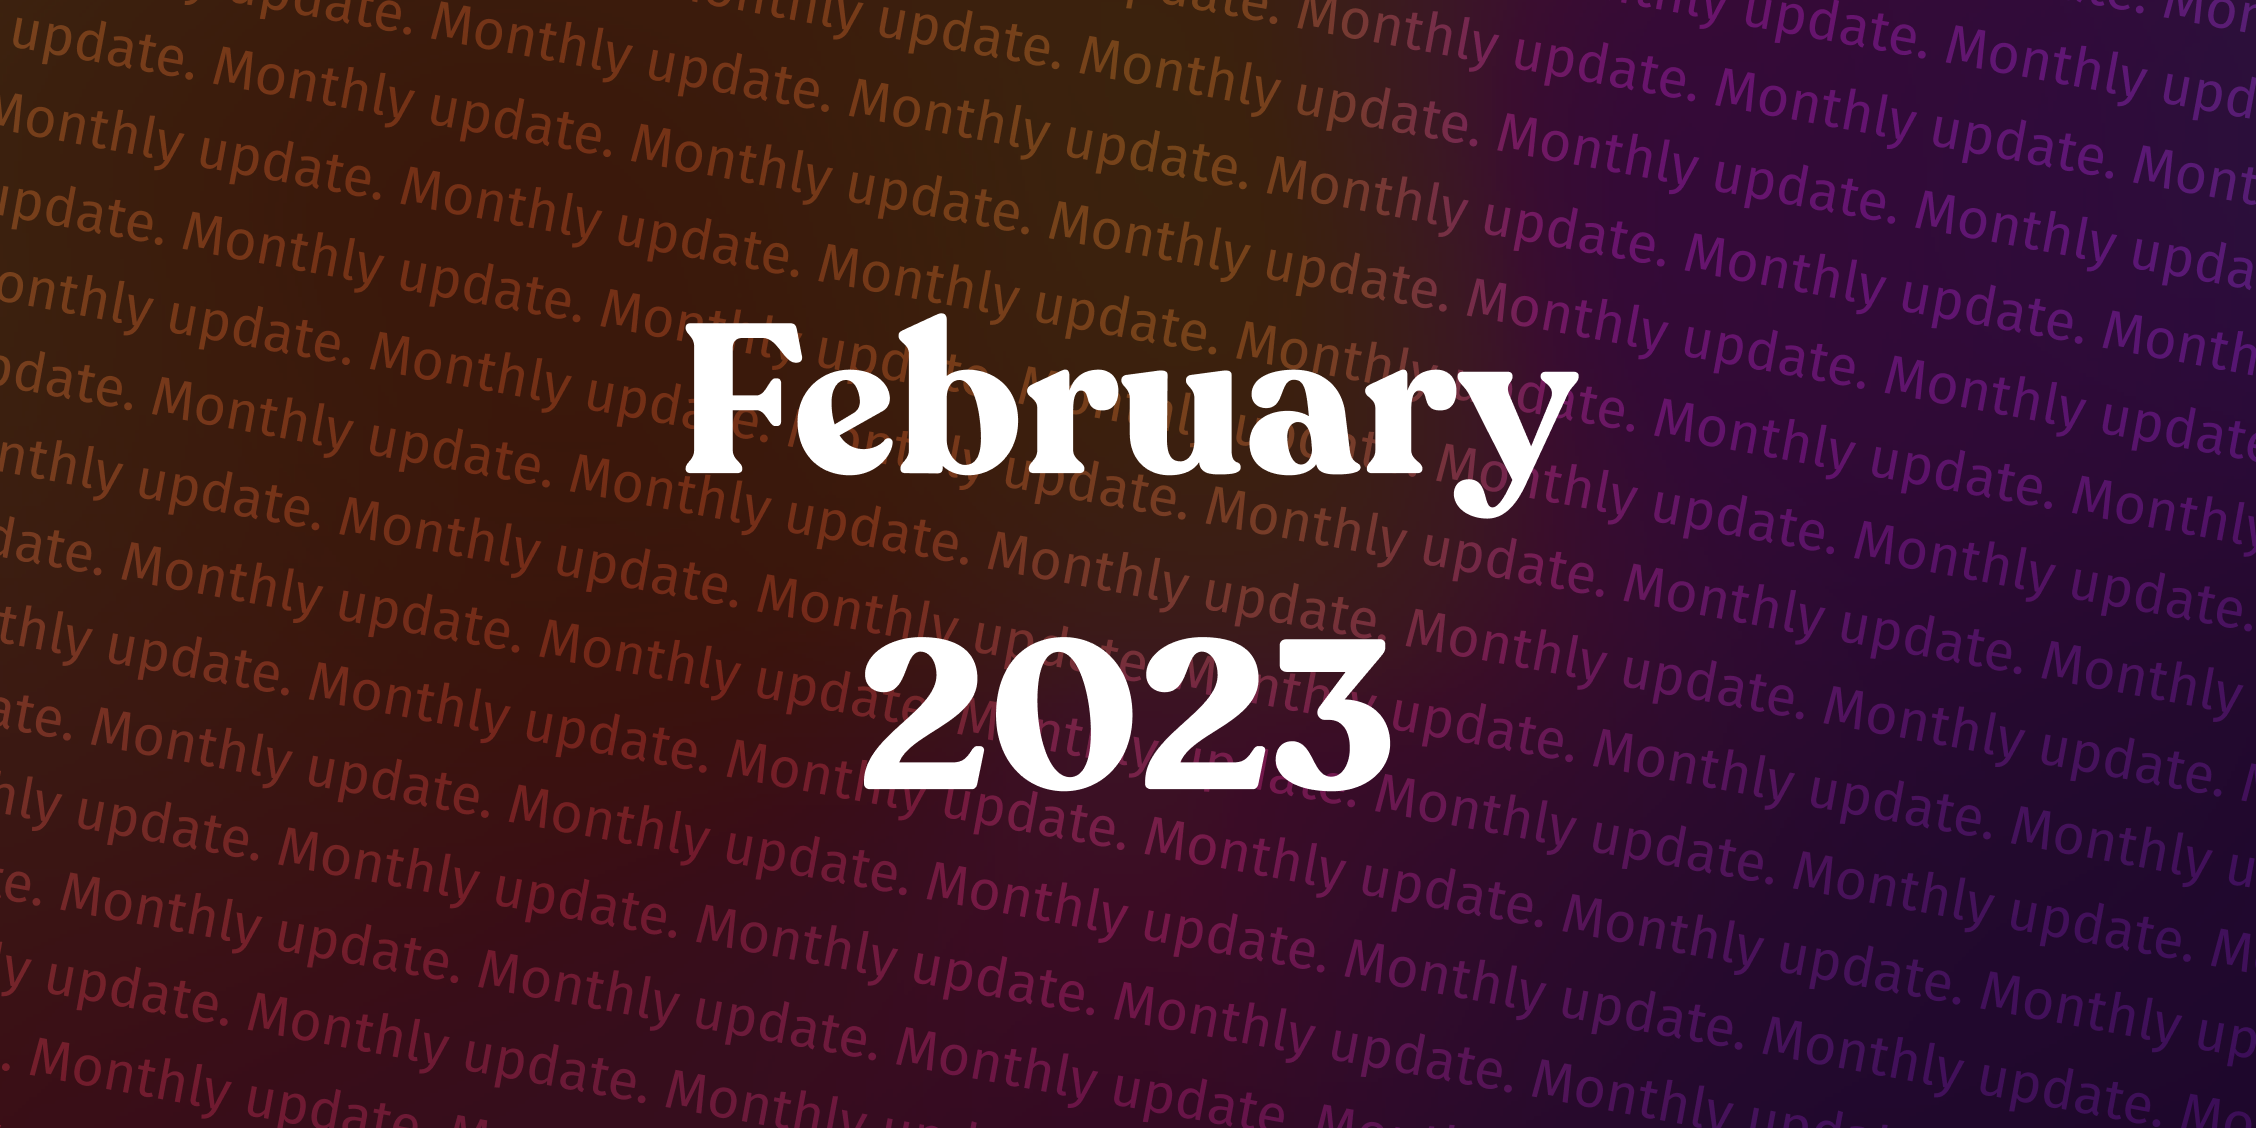 What’s new in Pausly, February 2023